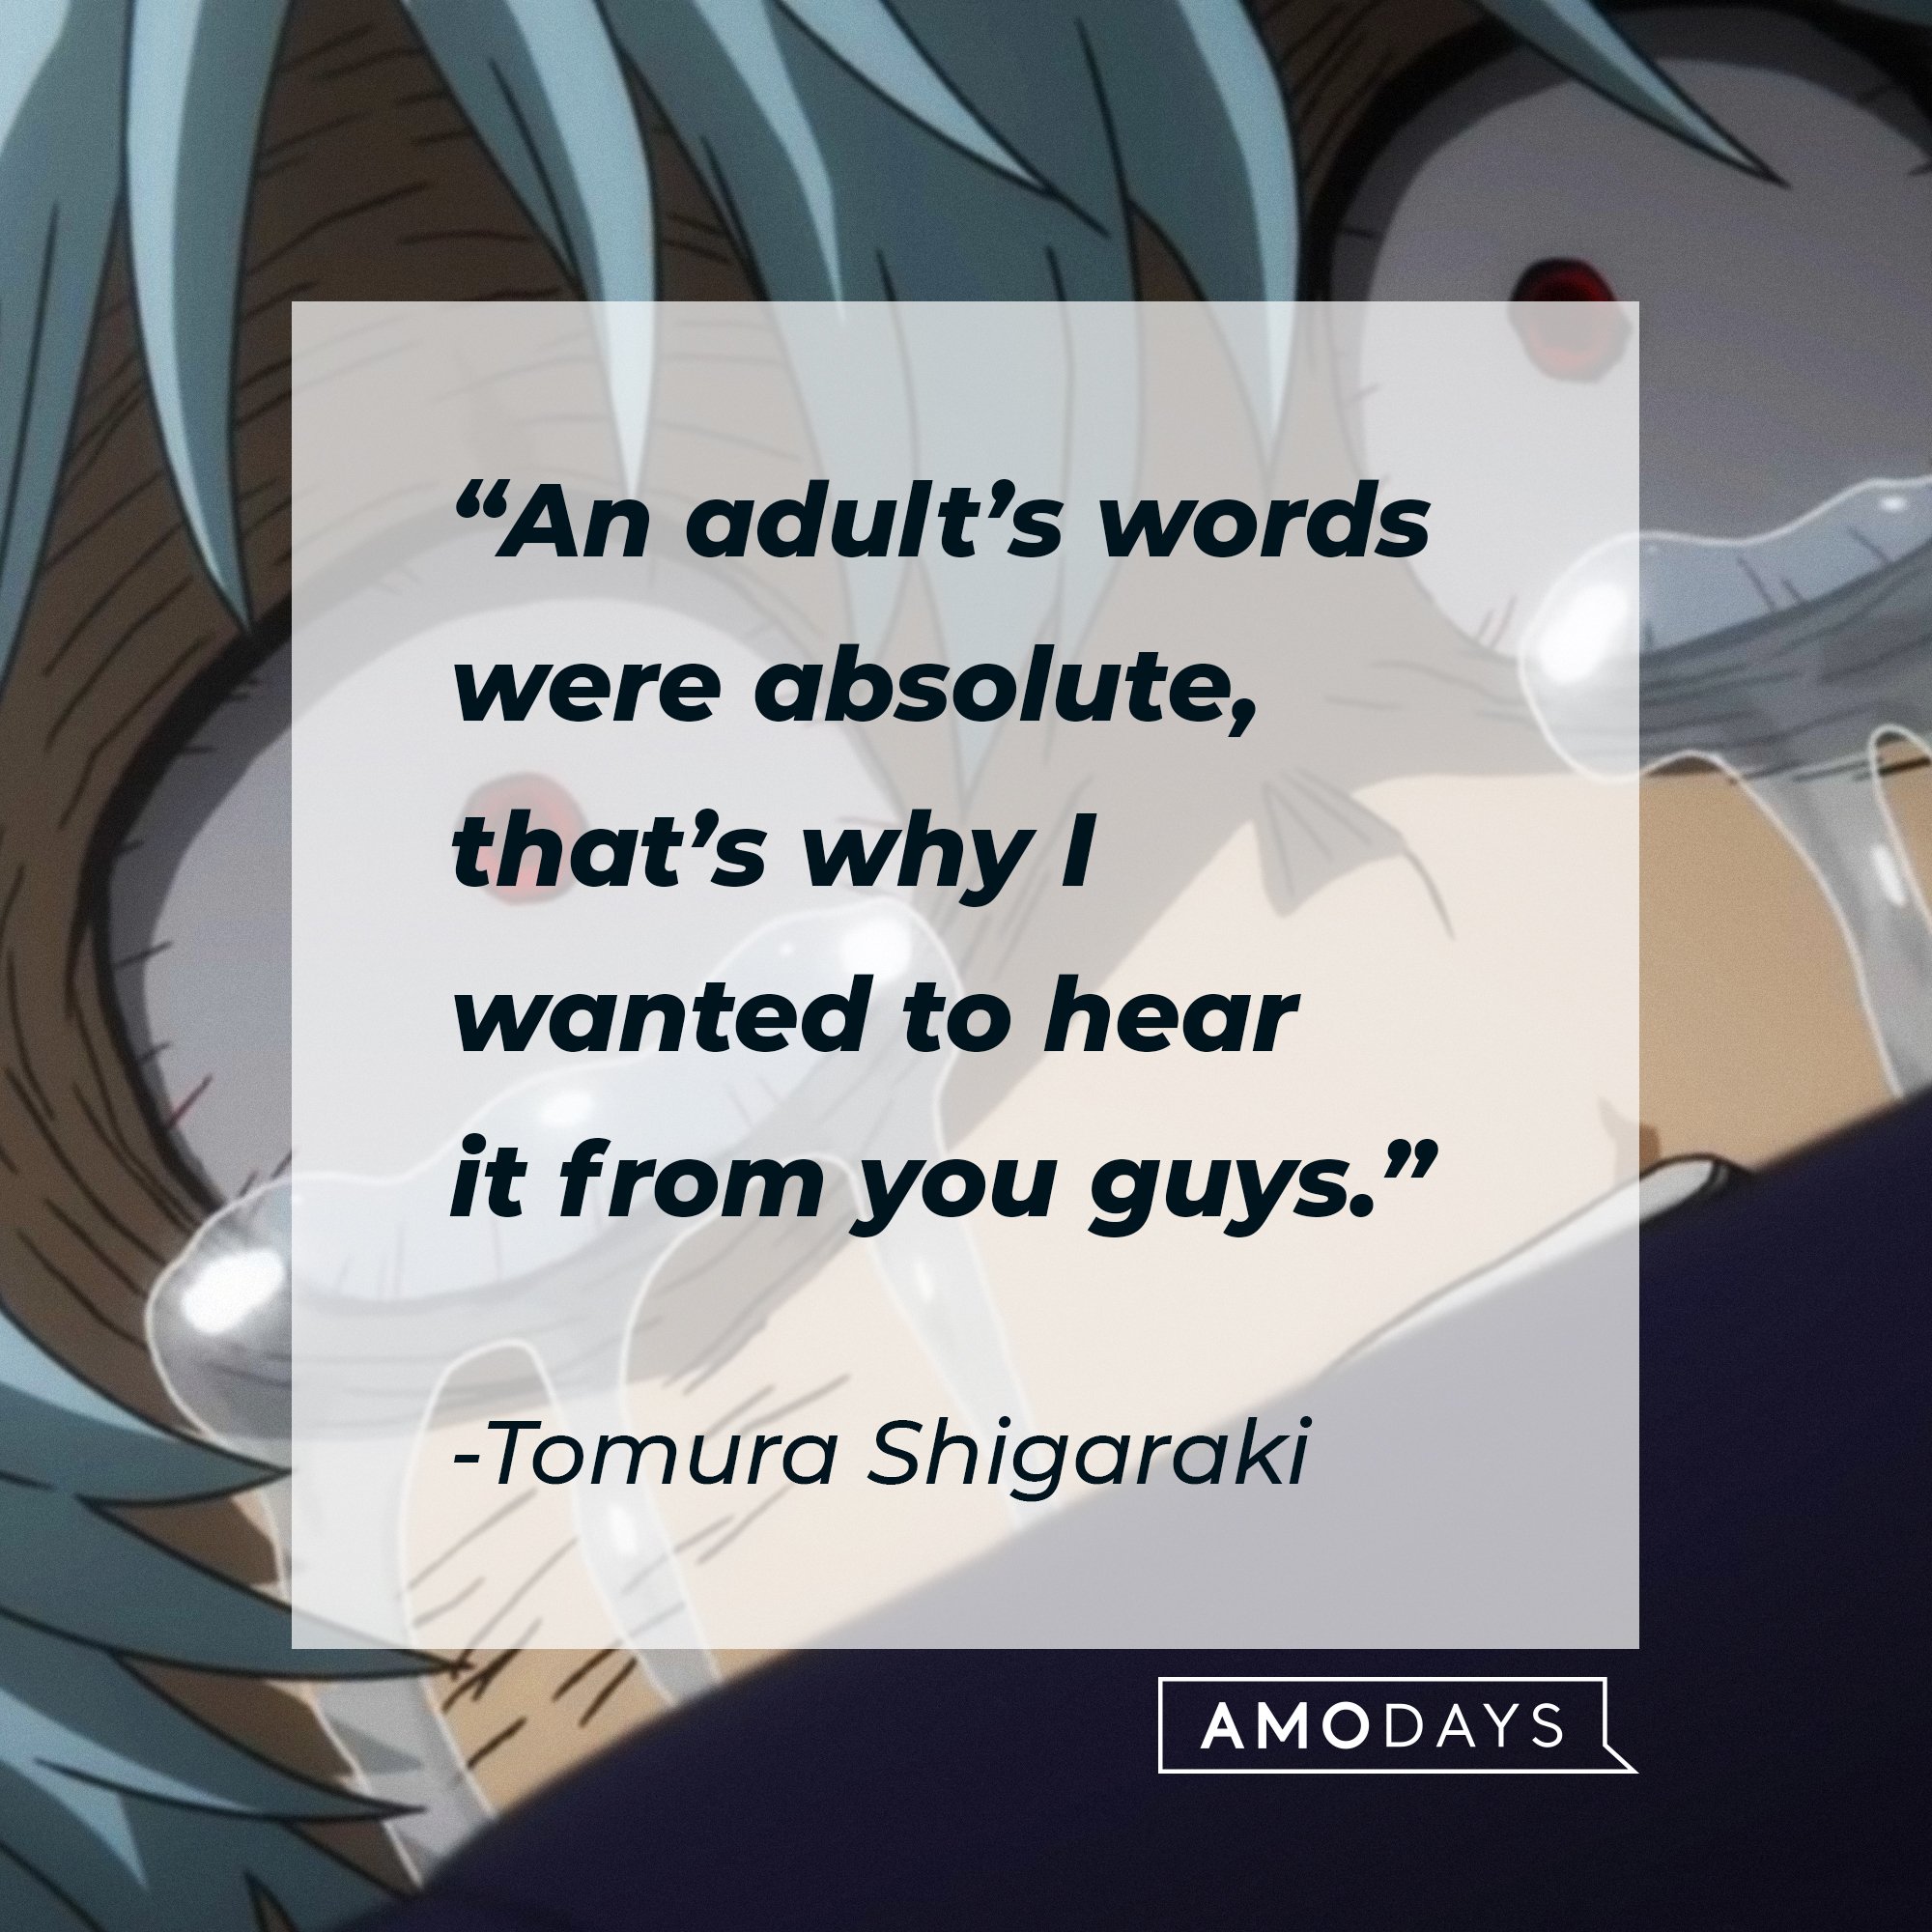 Tomura Shigaraki’s quote: “An adult’s words were absolute, that’s why I wanted to hear it from you guys.” | Image: AmoDays